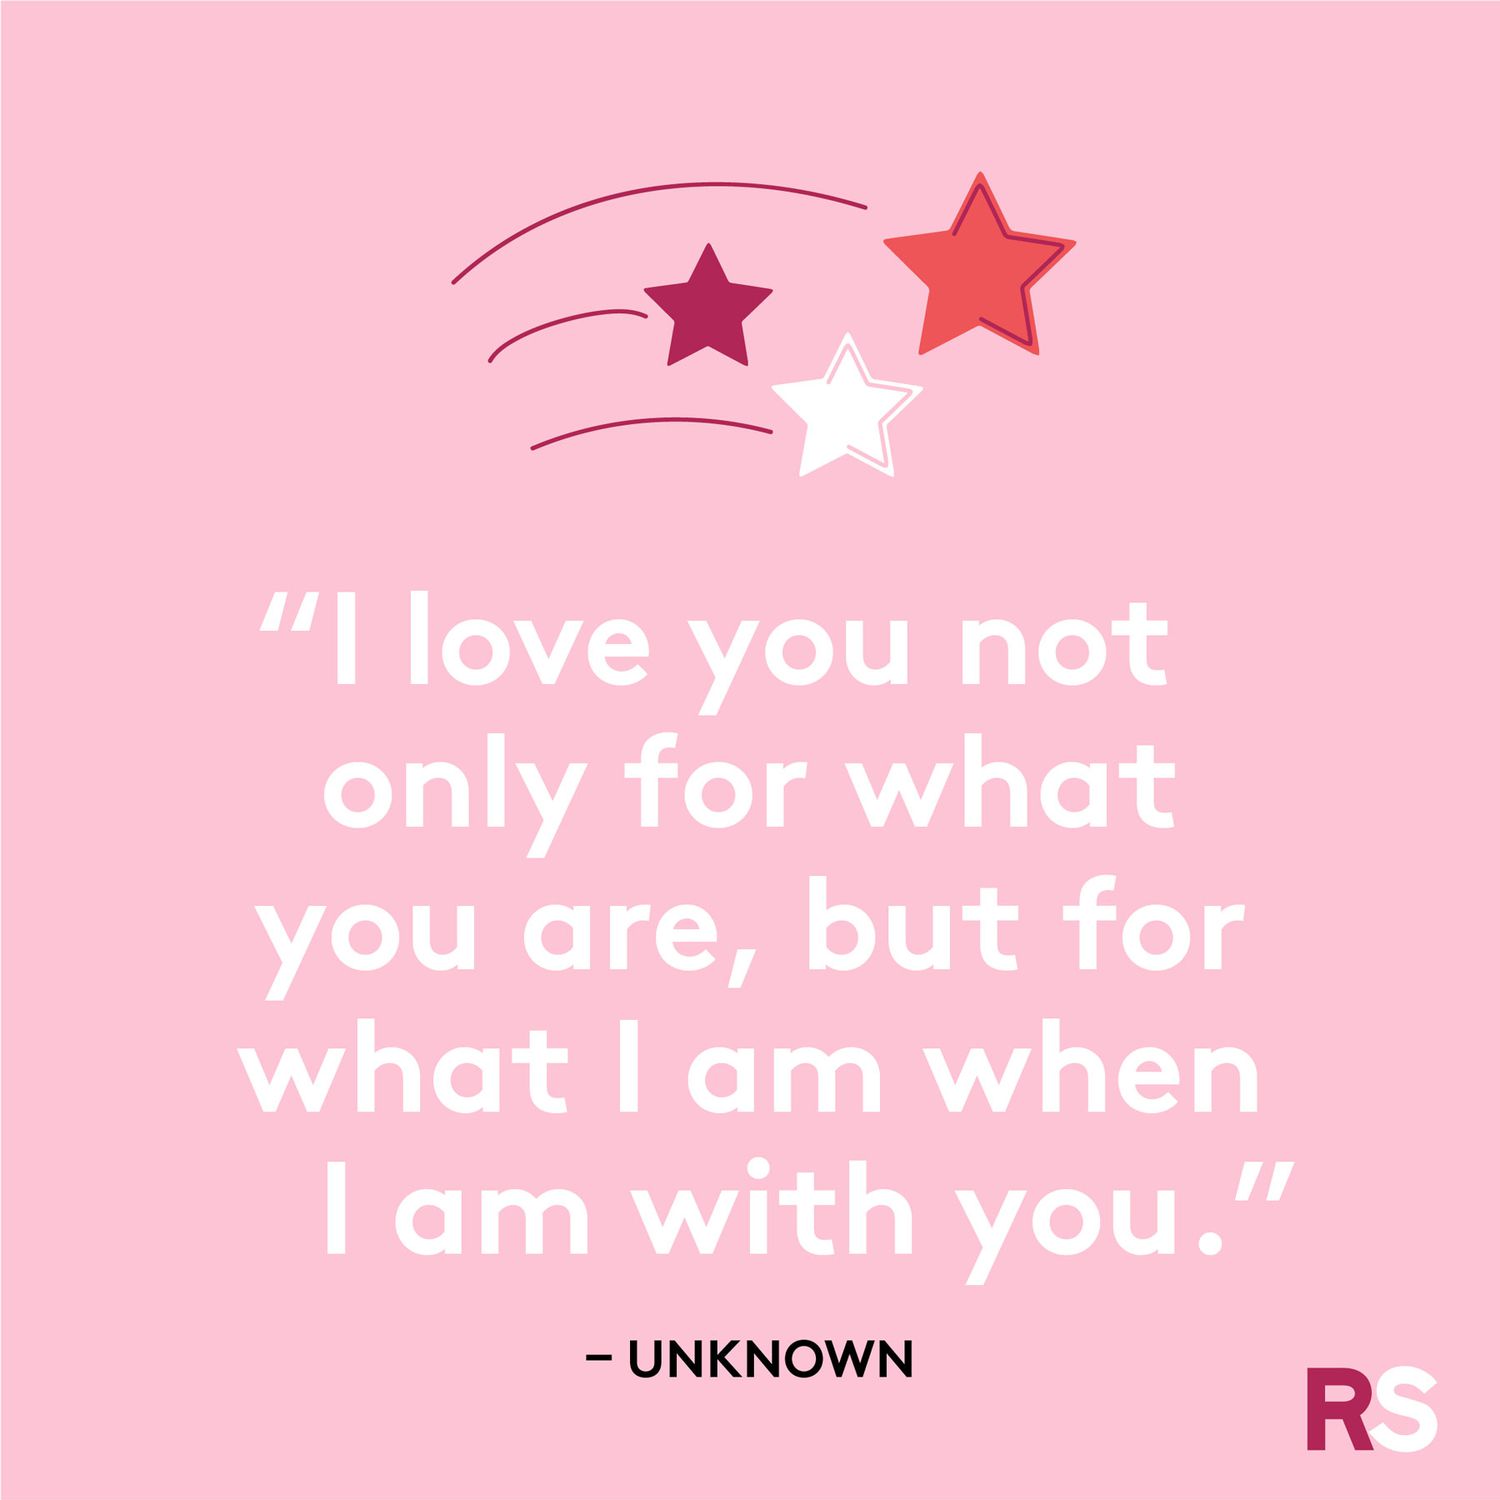 Love Quotes: 41 of the Best Quotes About Love | Real Simple